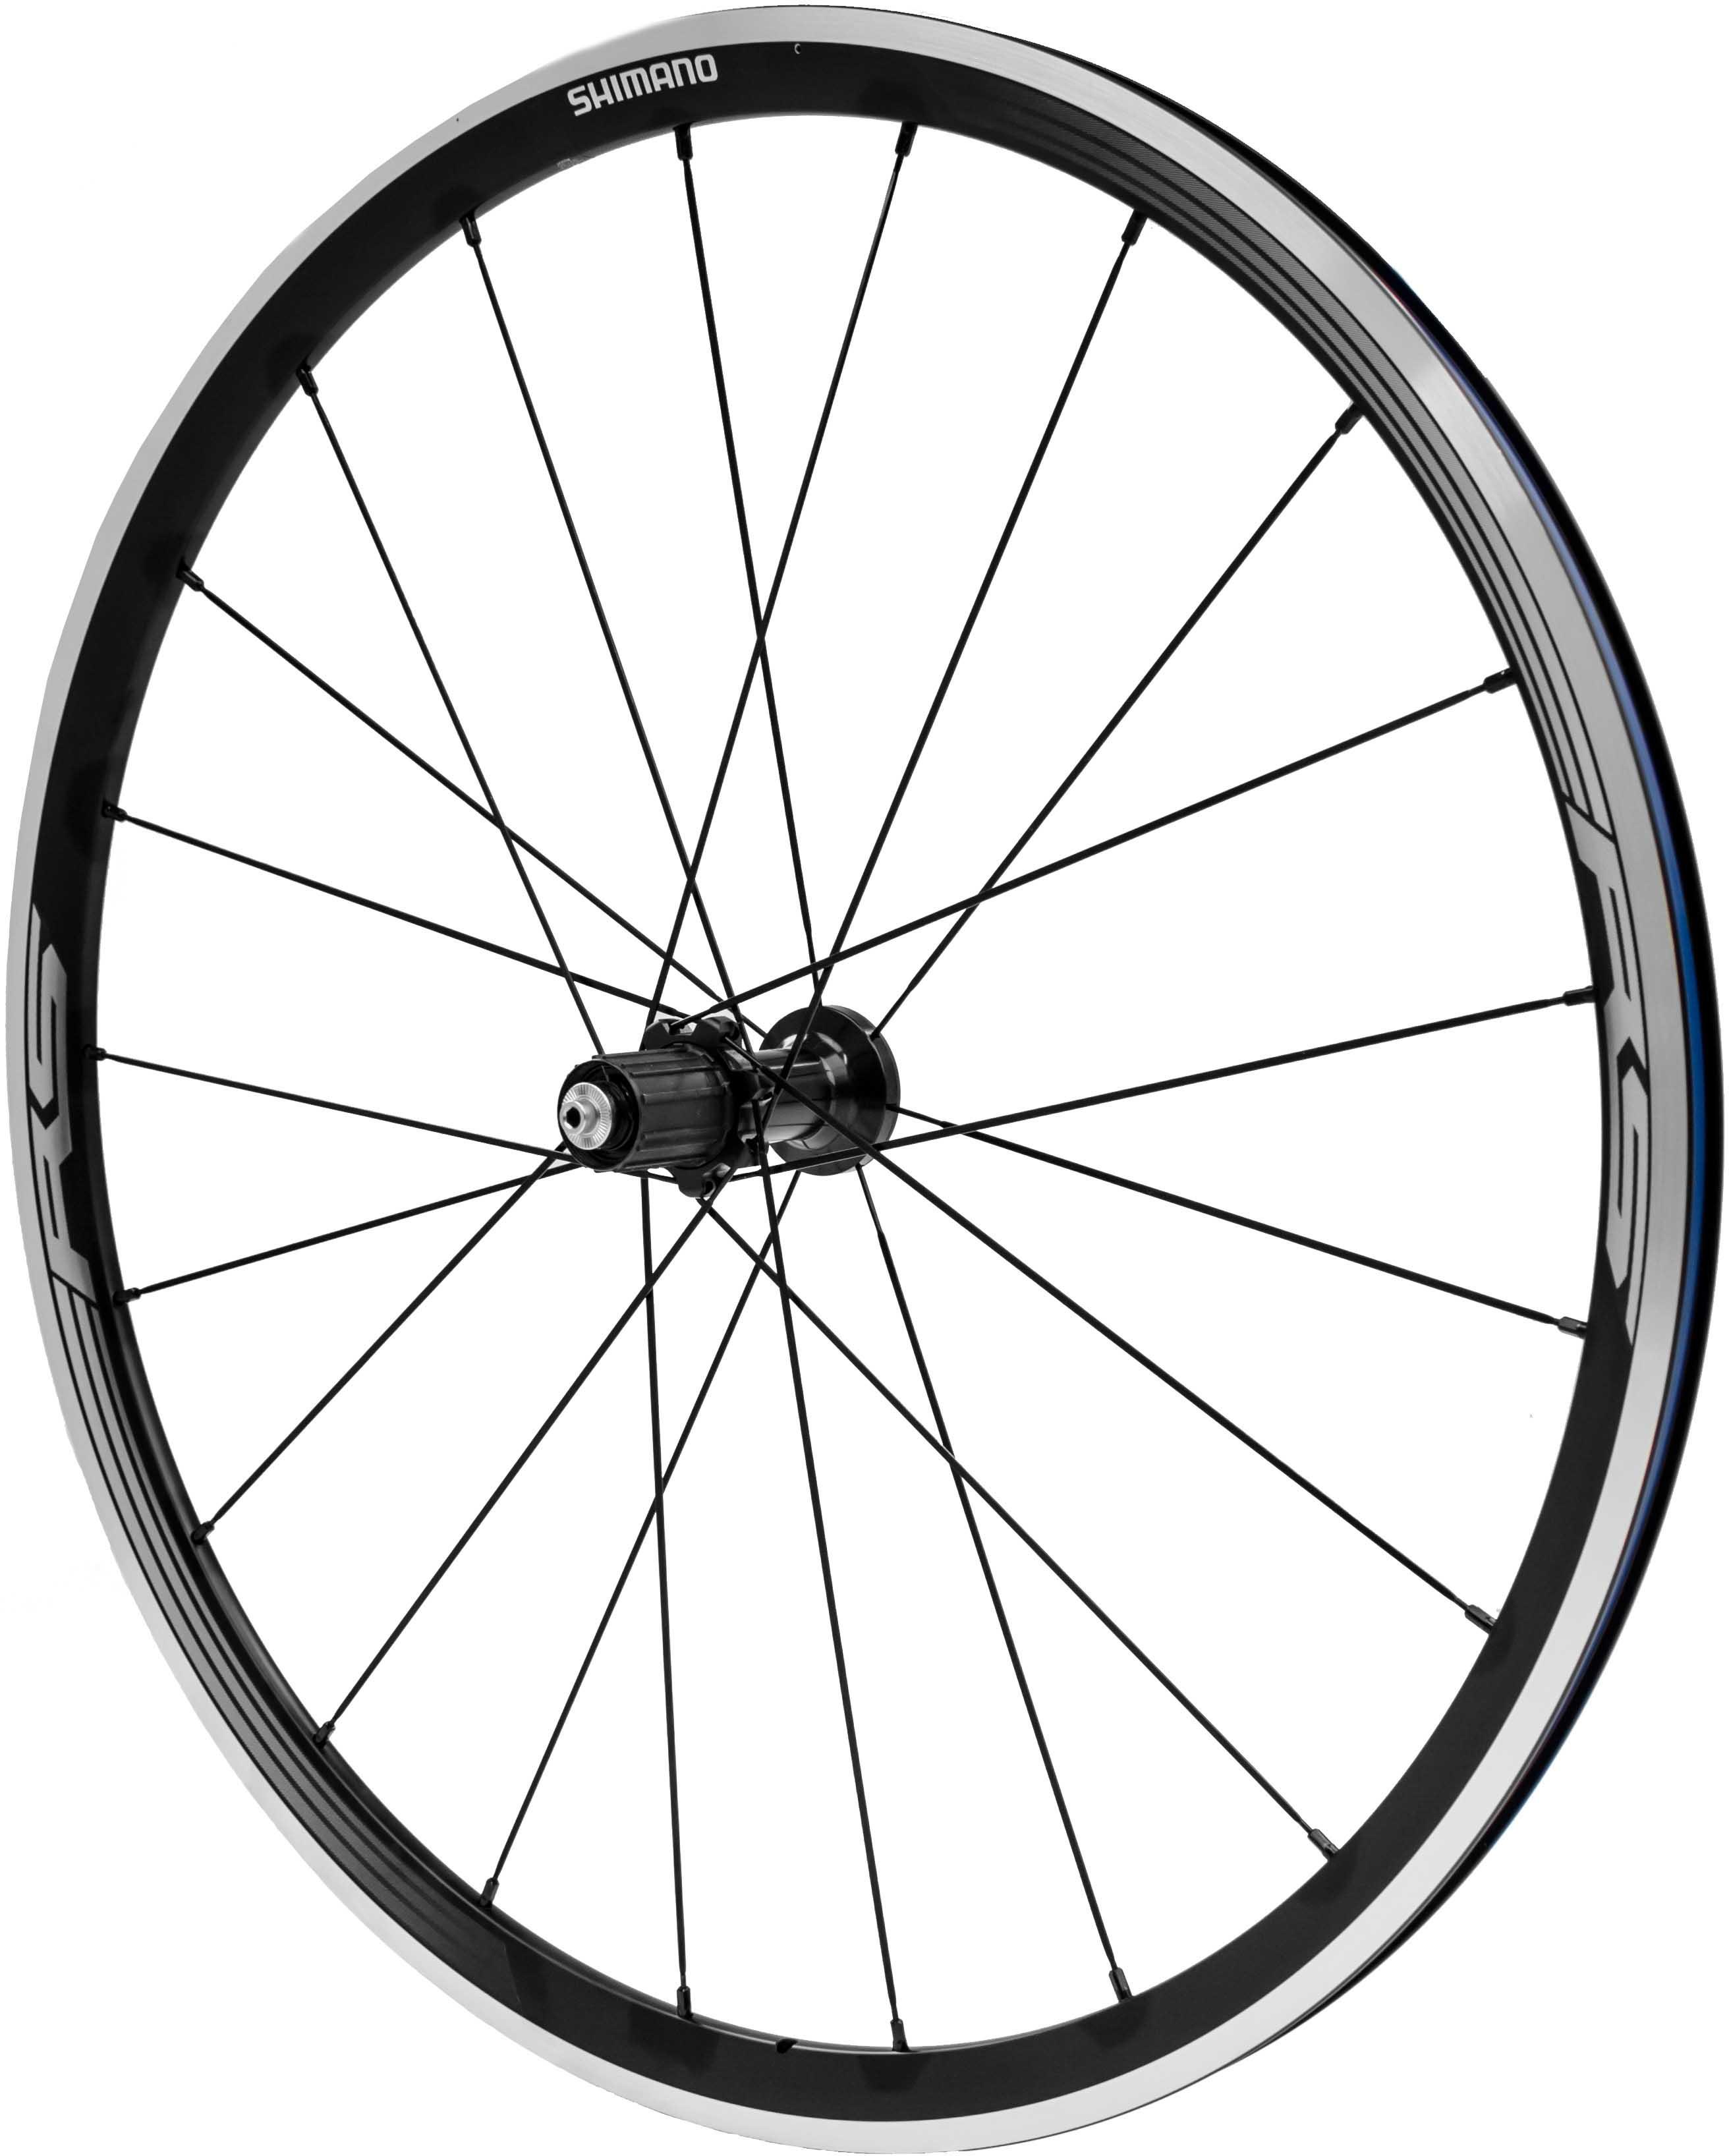 Wh-Rs330 Wheel, Clincher 30 Mm, 11-Speed, Black, Rear